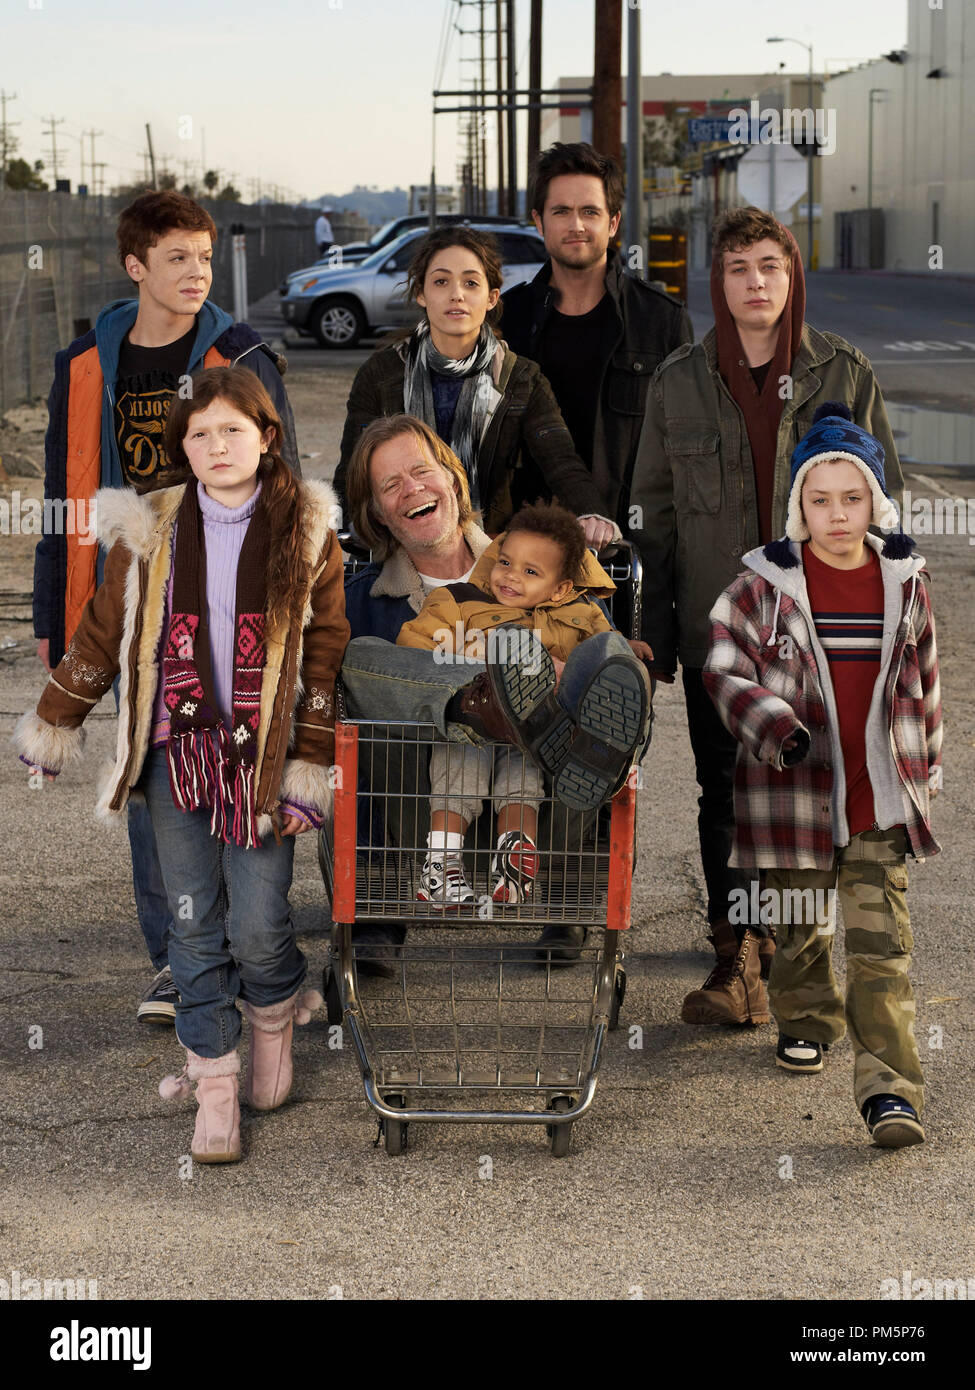 (From left to right) Cameron Monaghan as Ian, Emma Kenney as Debbie, William H. Macy as Frank, Blake and Brennan Johnson as Liam, Emmy Rossum as Fiona, Justin Chatwin as Steve, Jeremy White as Lip, and Ethan Cutkosky as Carl in Shameless - Photo: Gavin Bond/SHOWTIME Stock Photo